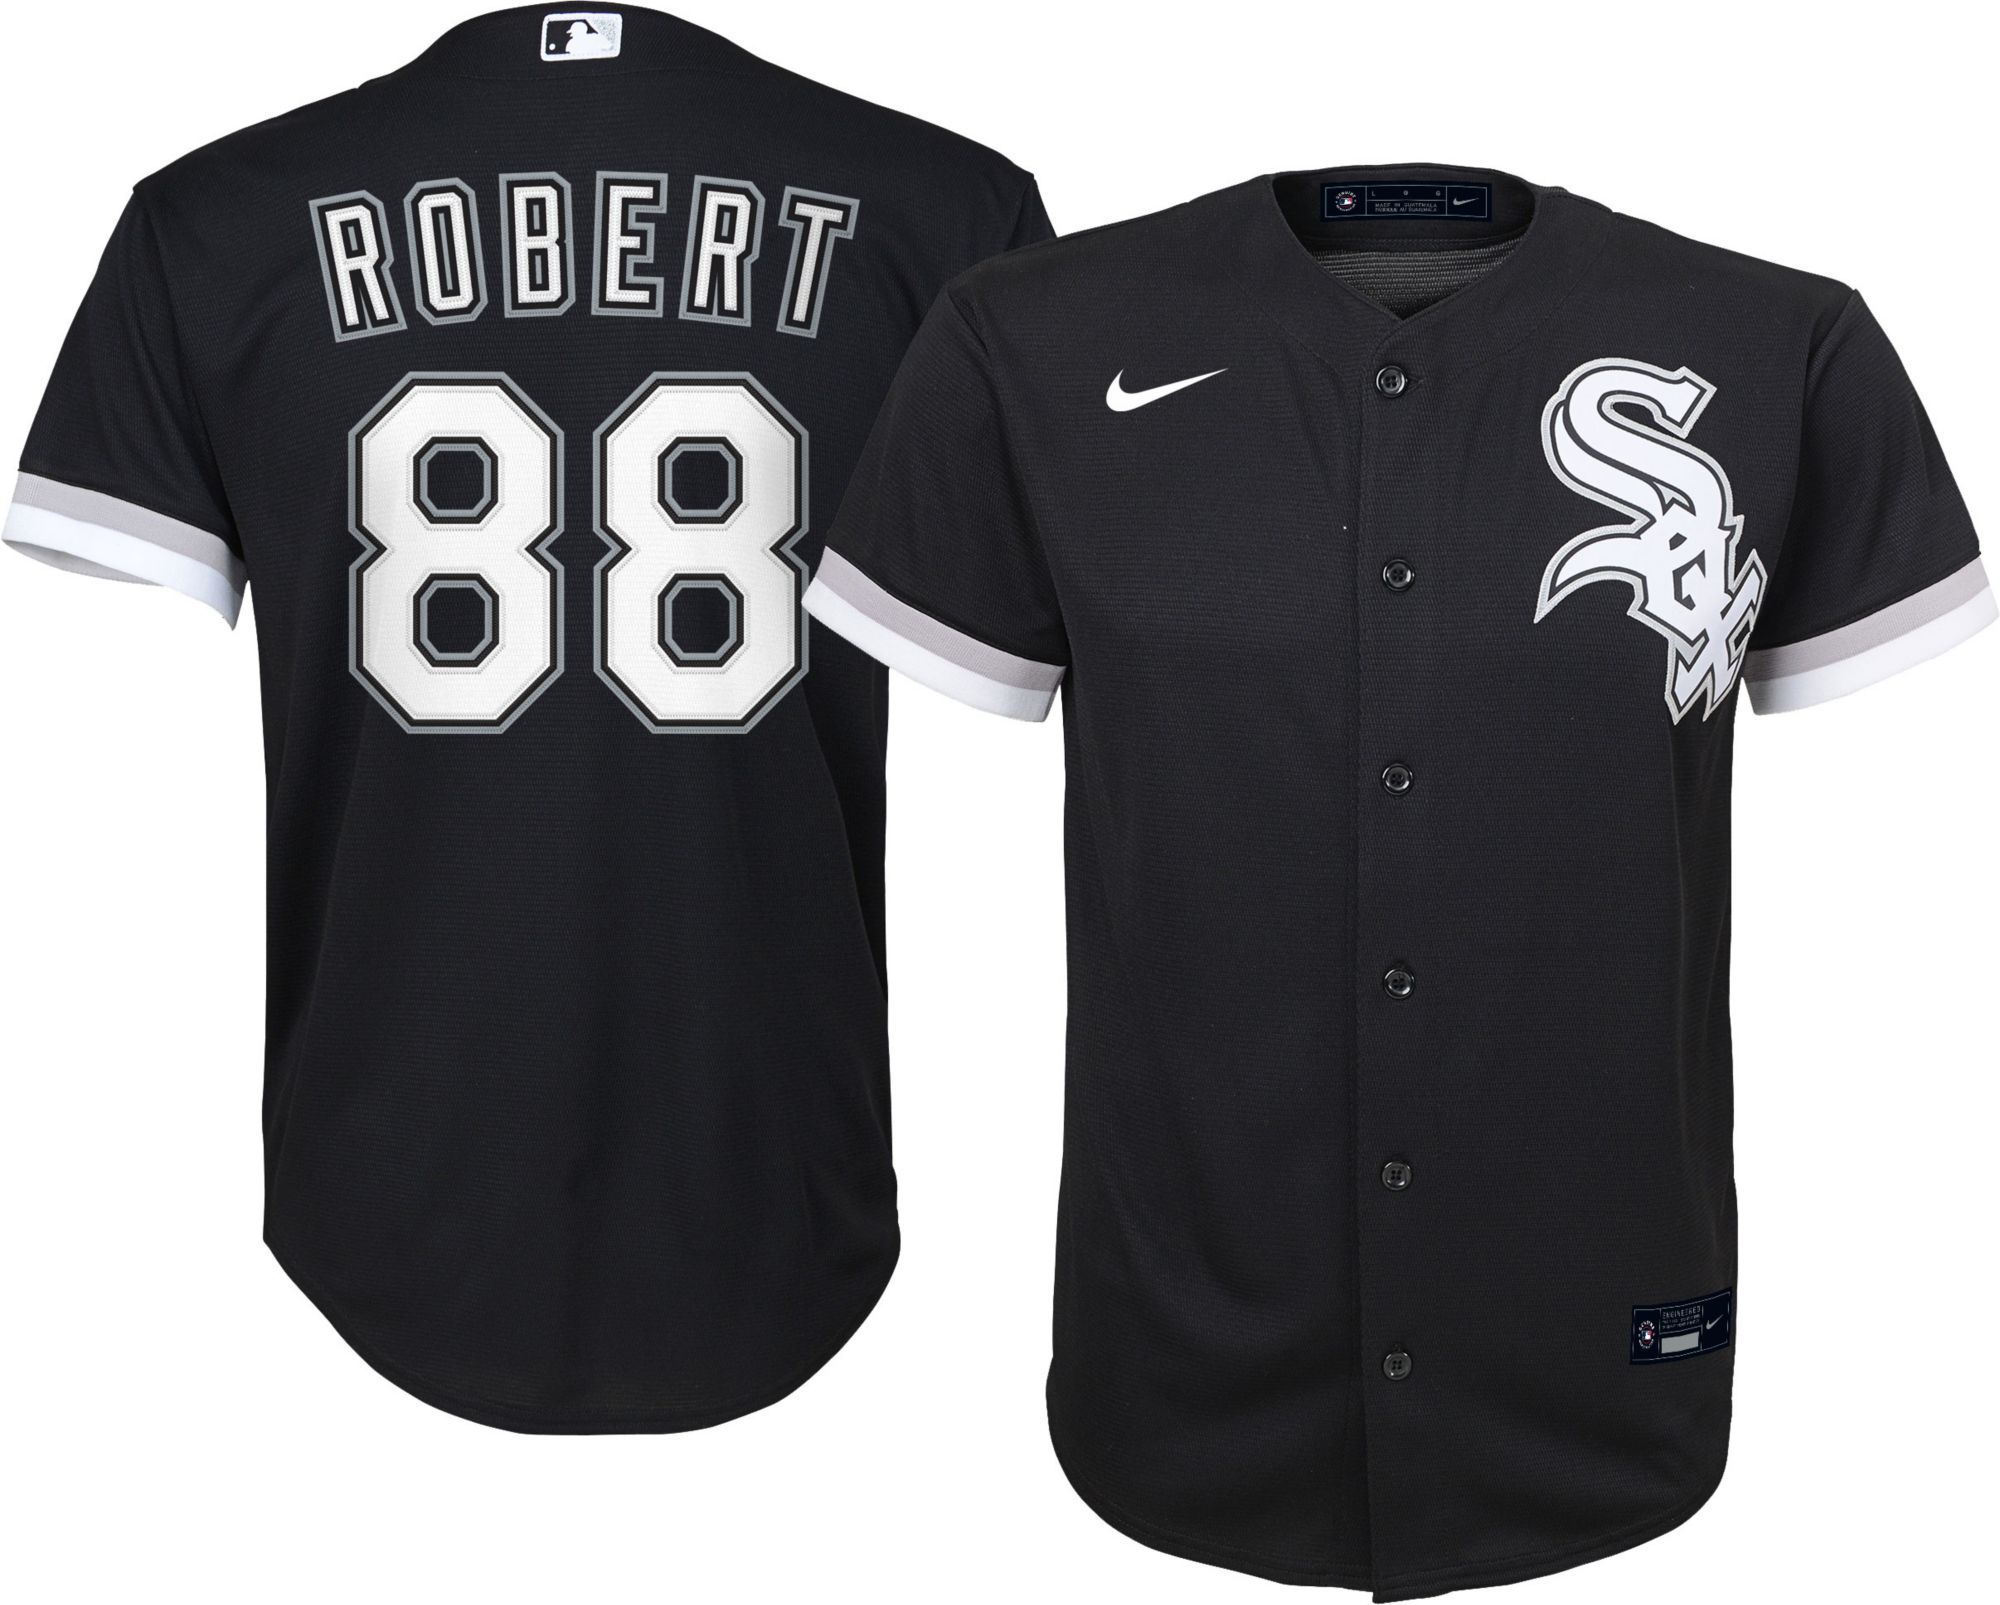 buy officia mercedes white sox jersey ,Chicago White Sox Gifts